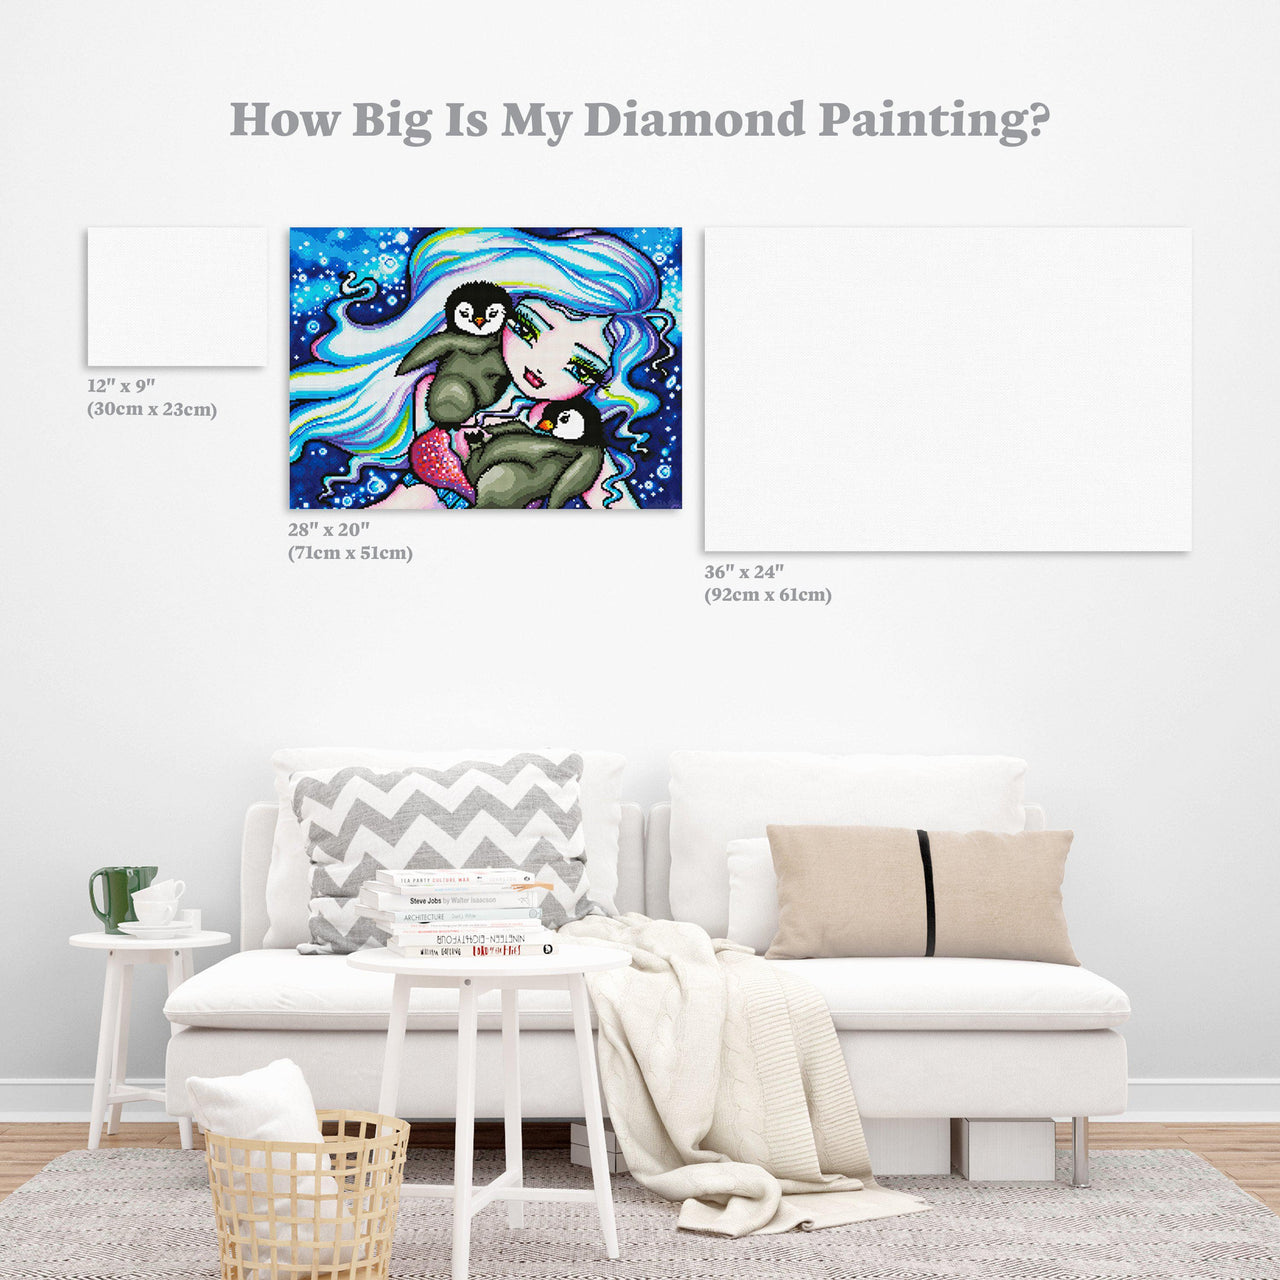 Diamond Painting Tag Alongs 28" x 20″ (71cm x 51cm) / Round with 54 Colors including 4 ABs / 45,612